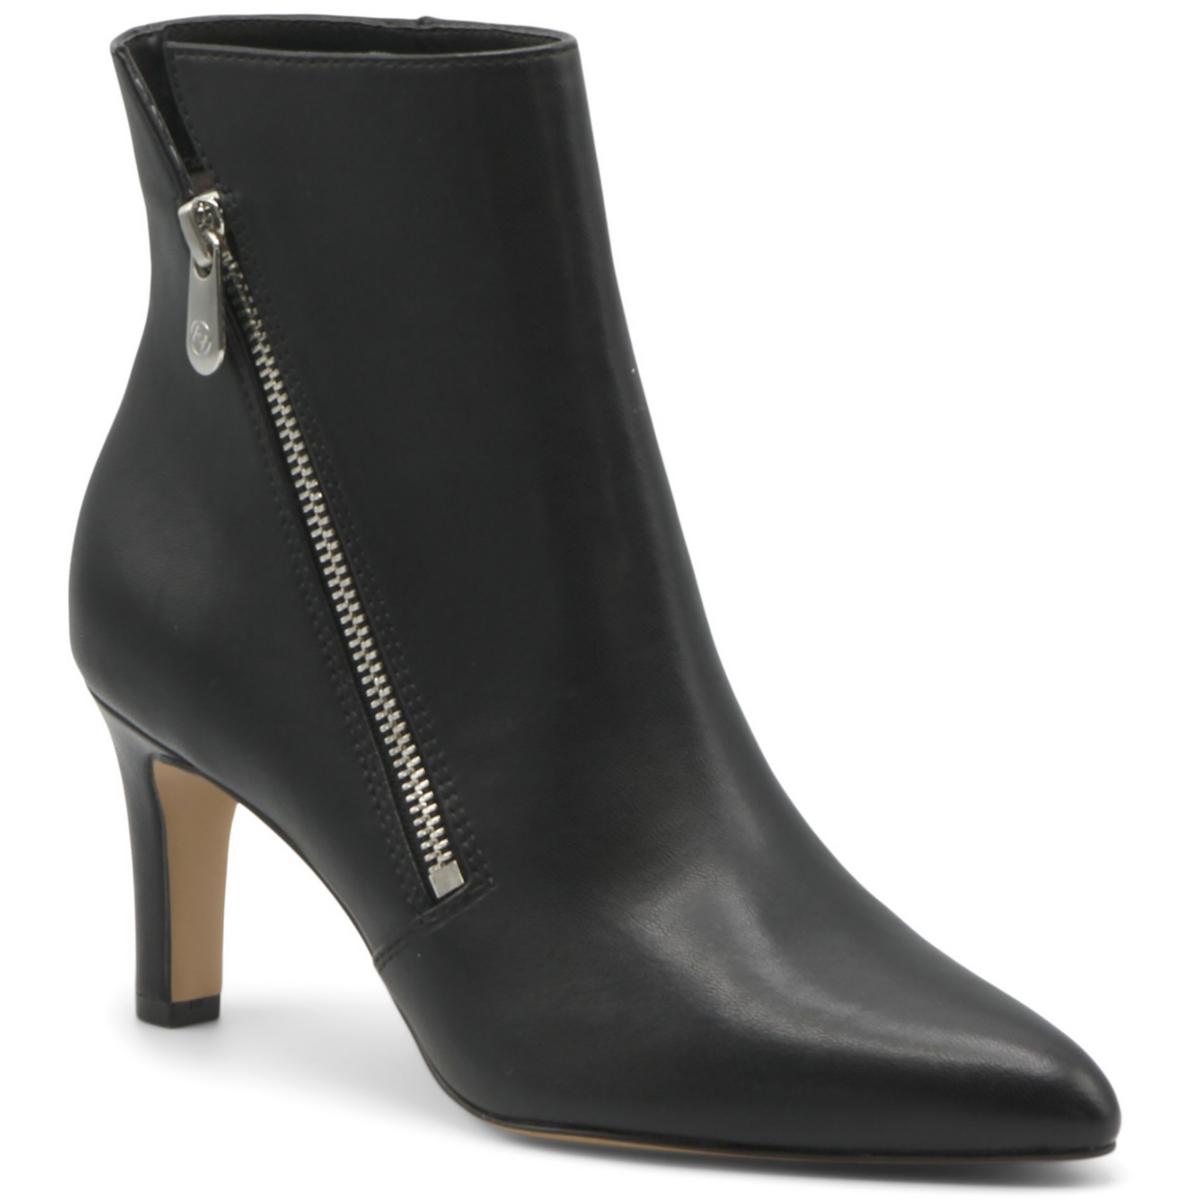 Adrienne Vittadini Sondy Womens Faux Leather Dressy Ankle Boots